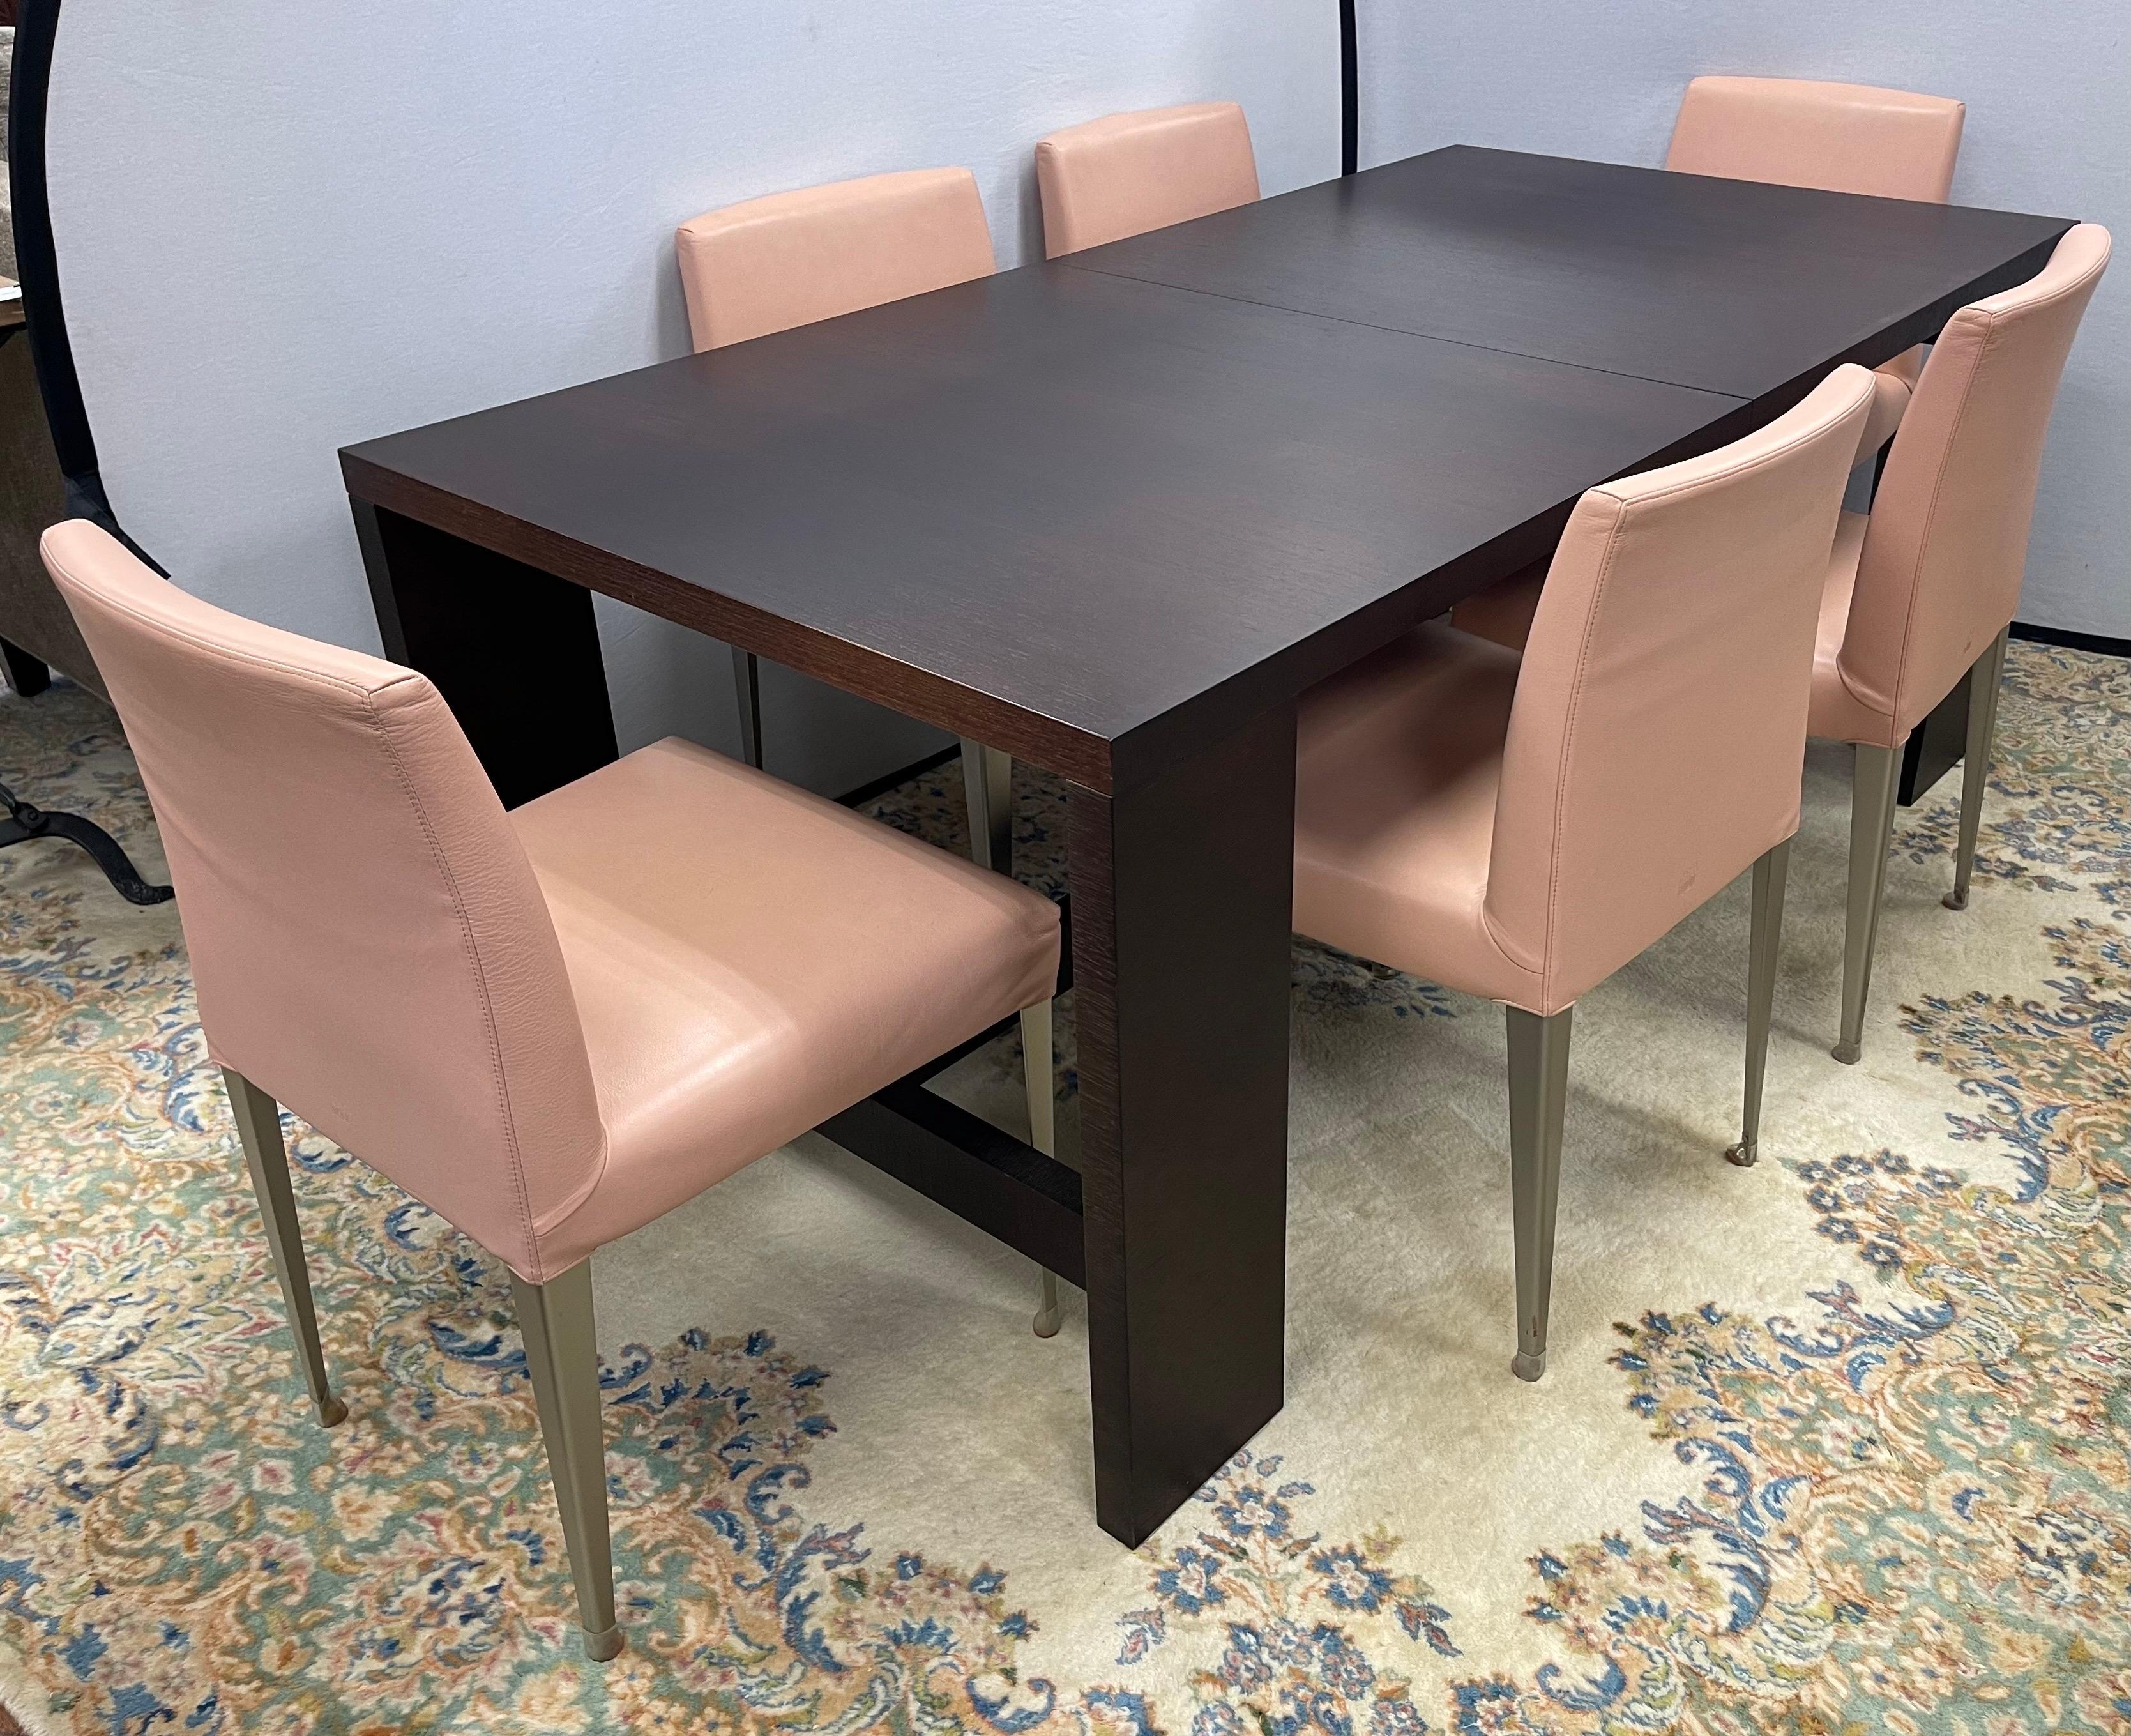 Mid-Century Modern B&B Italia Dining Set by Antonio Citterio with Dining Table and 6 Leather Chairs